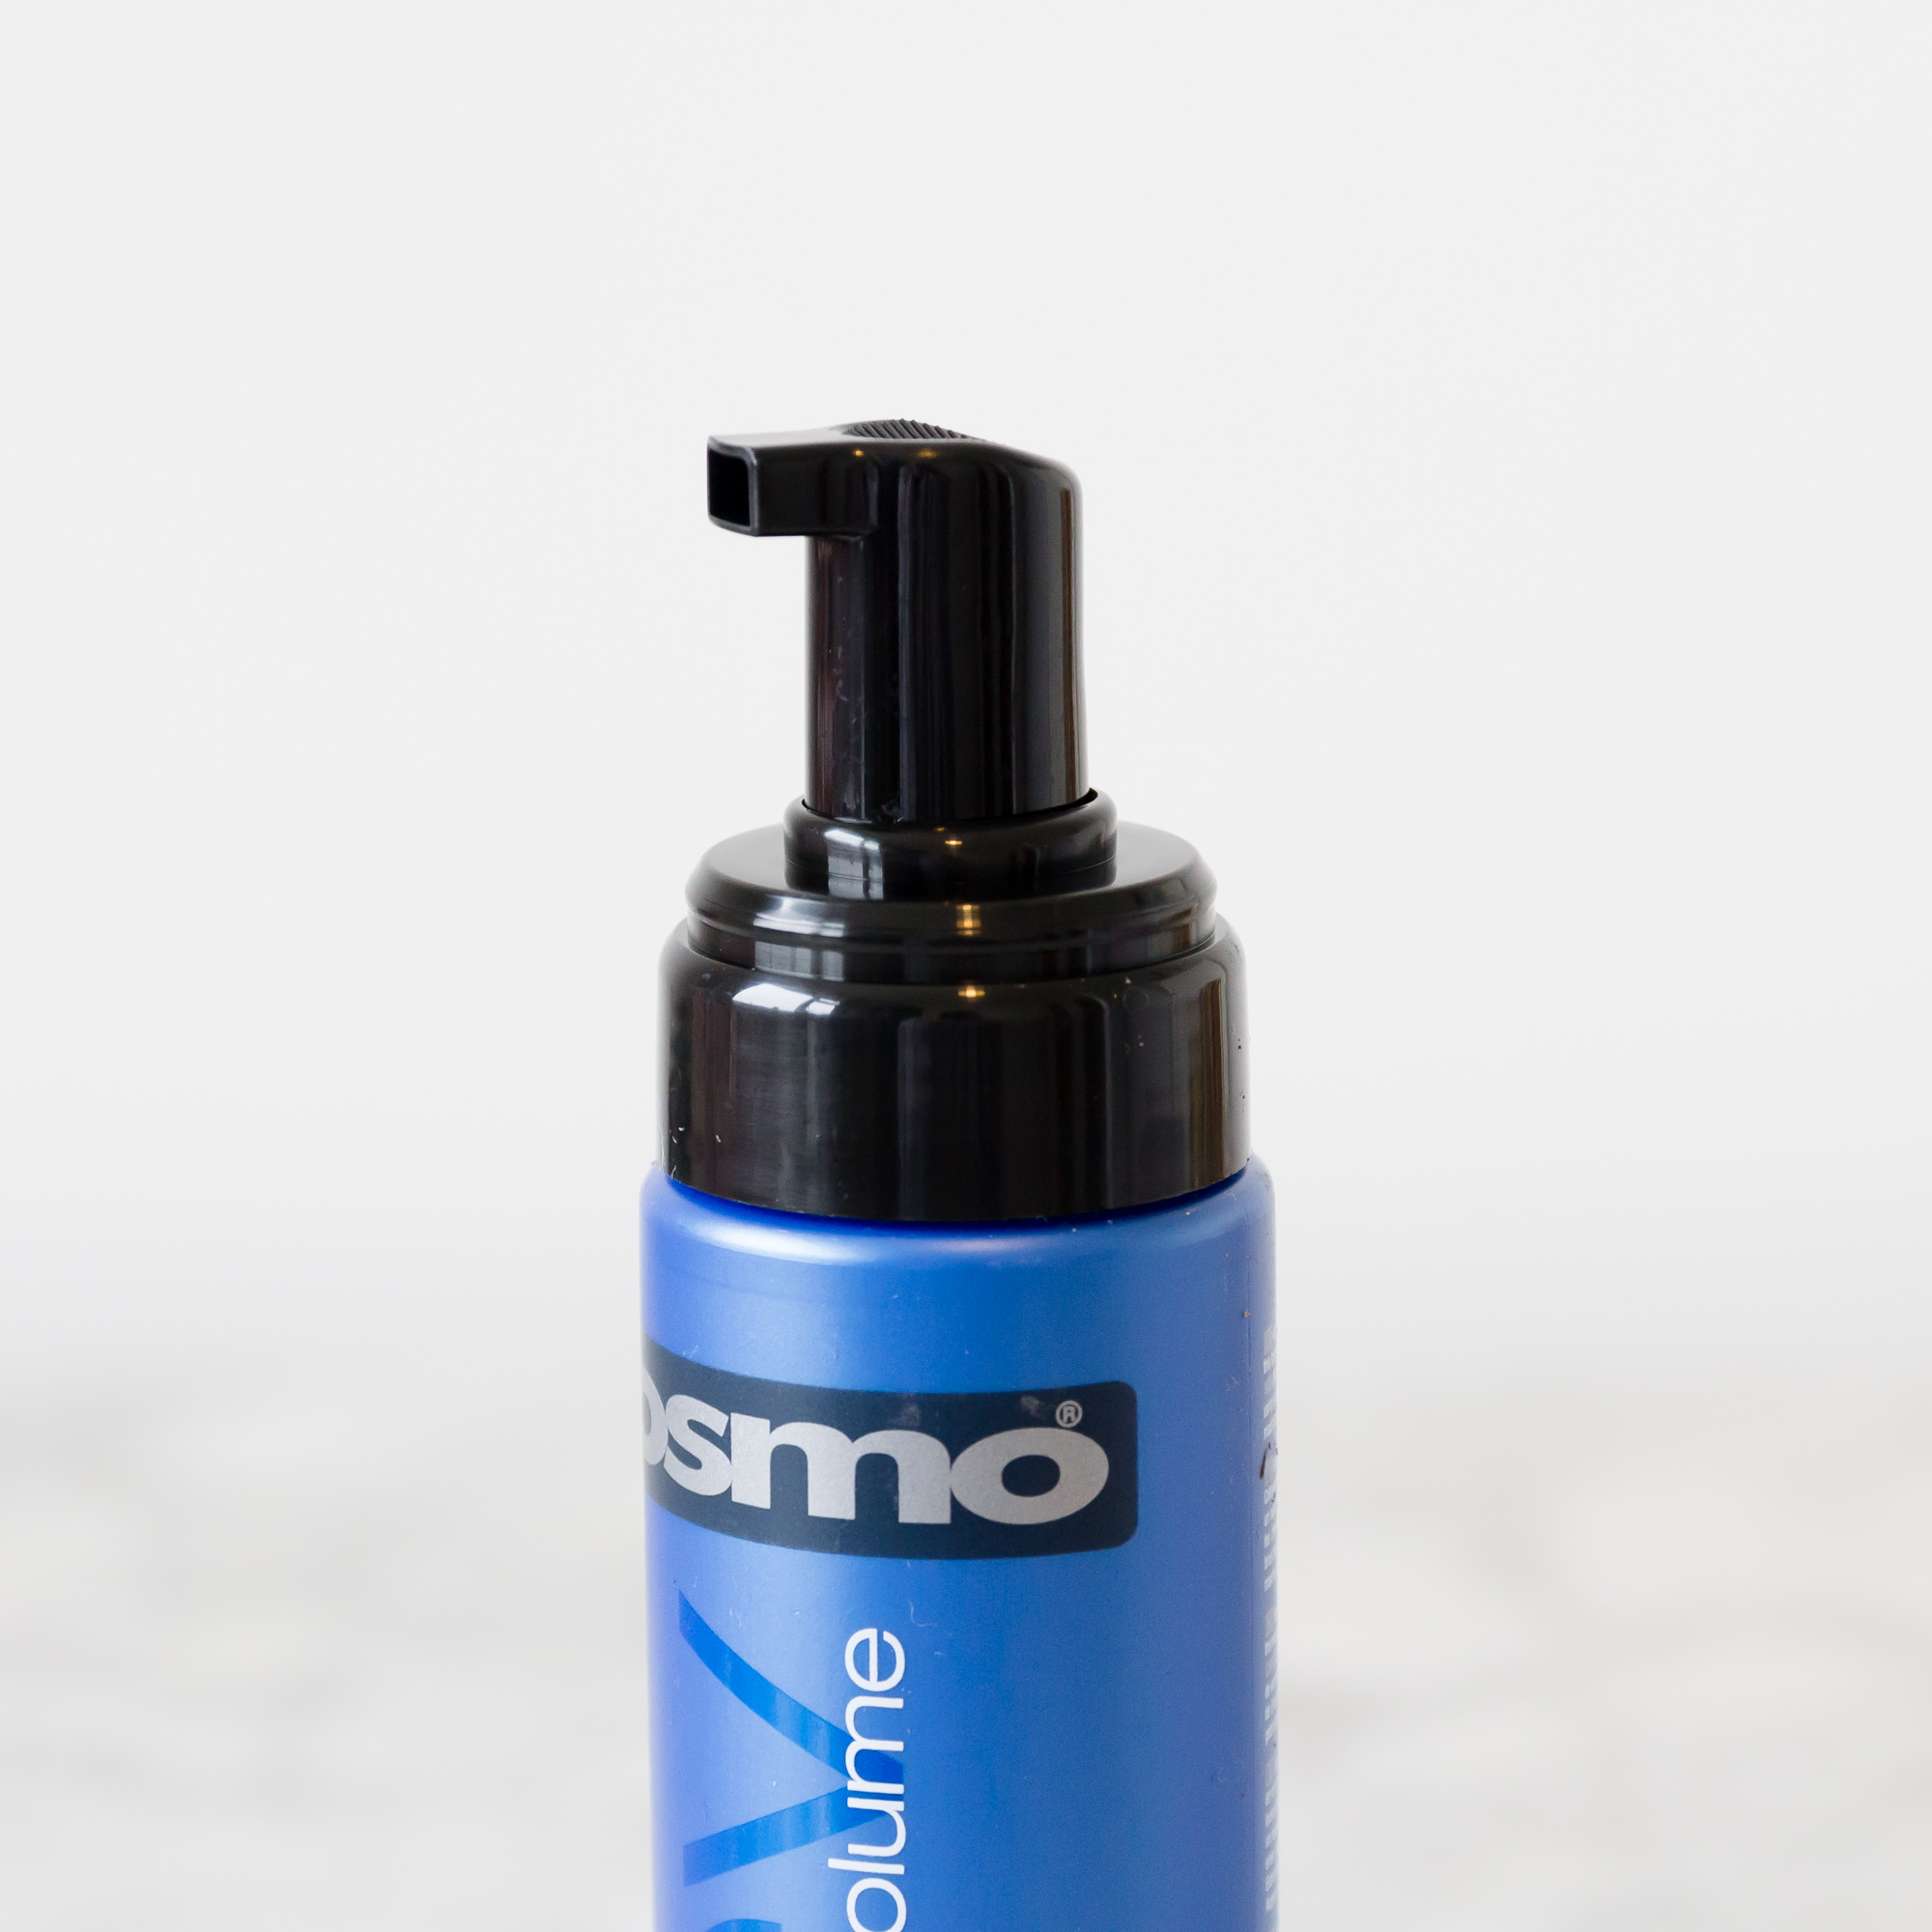 How to use hair mousse - Osmo Cosmetics